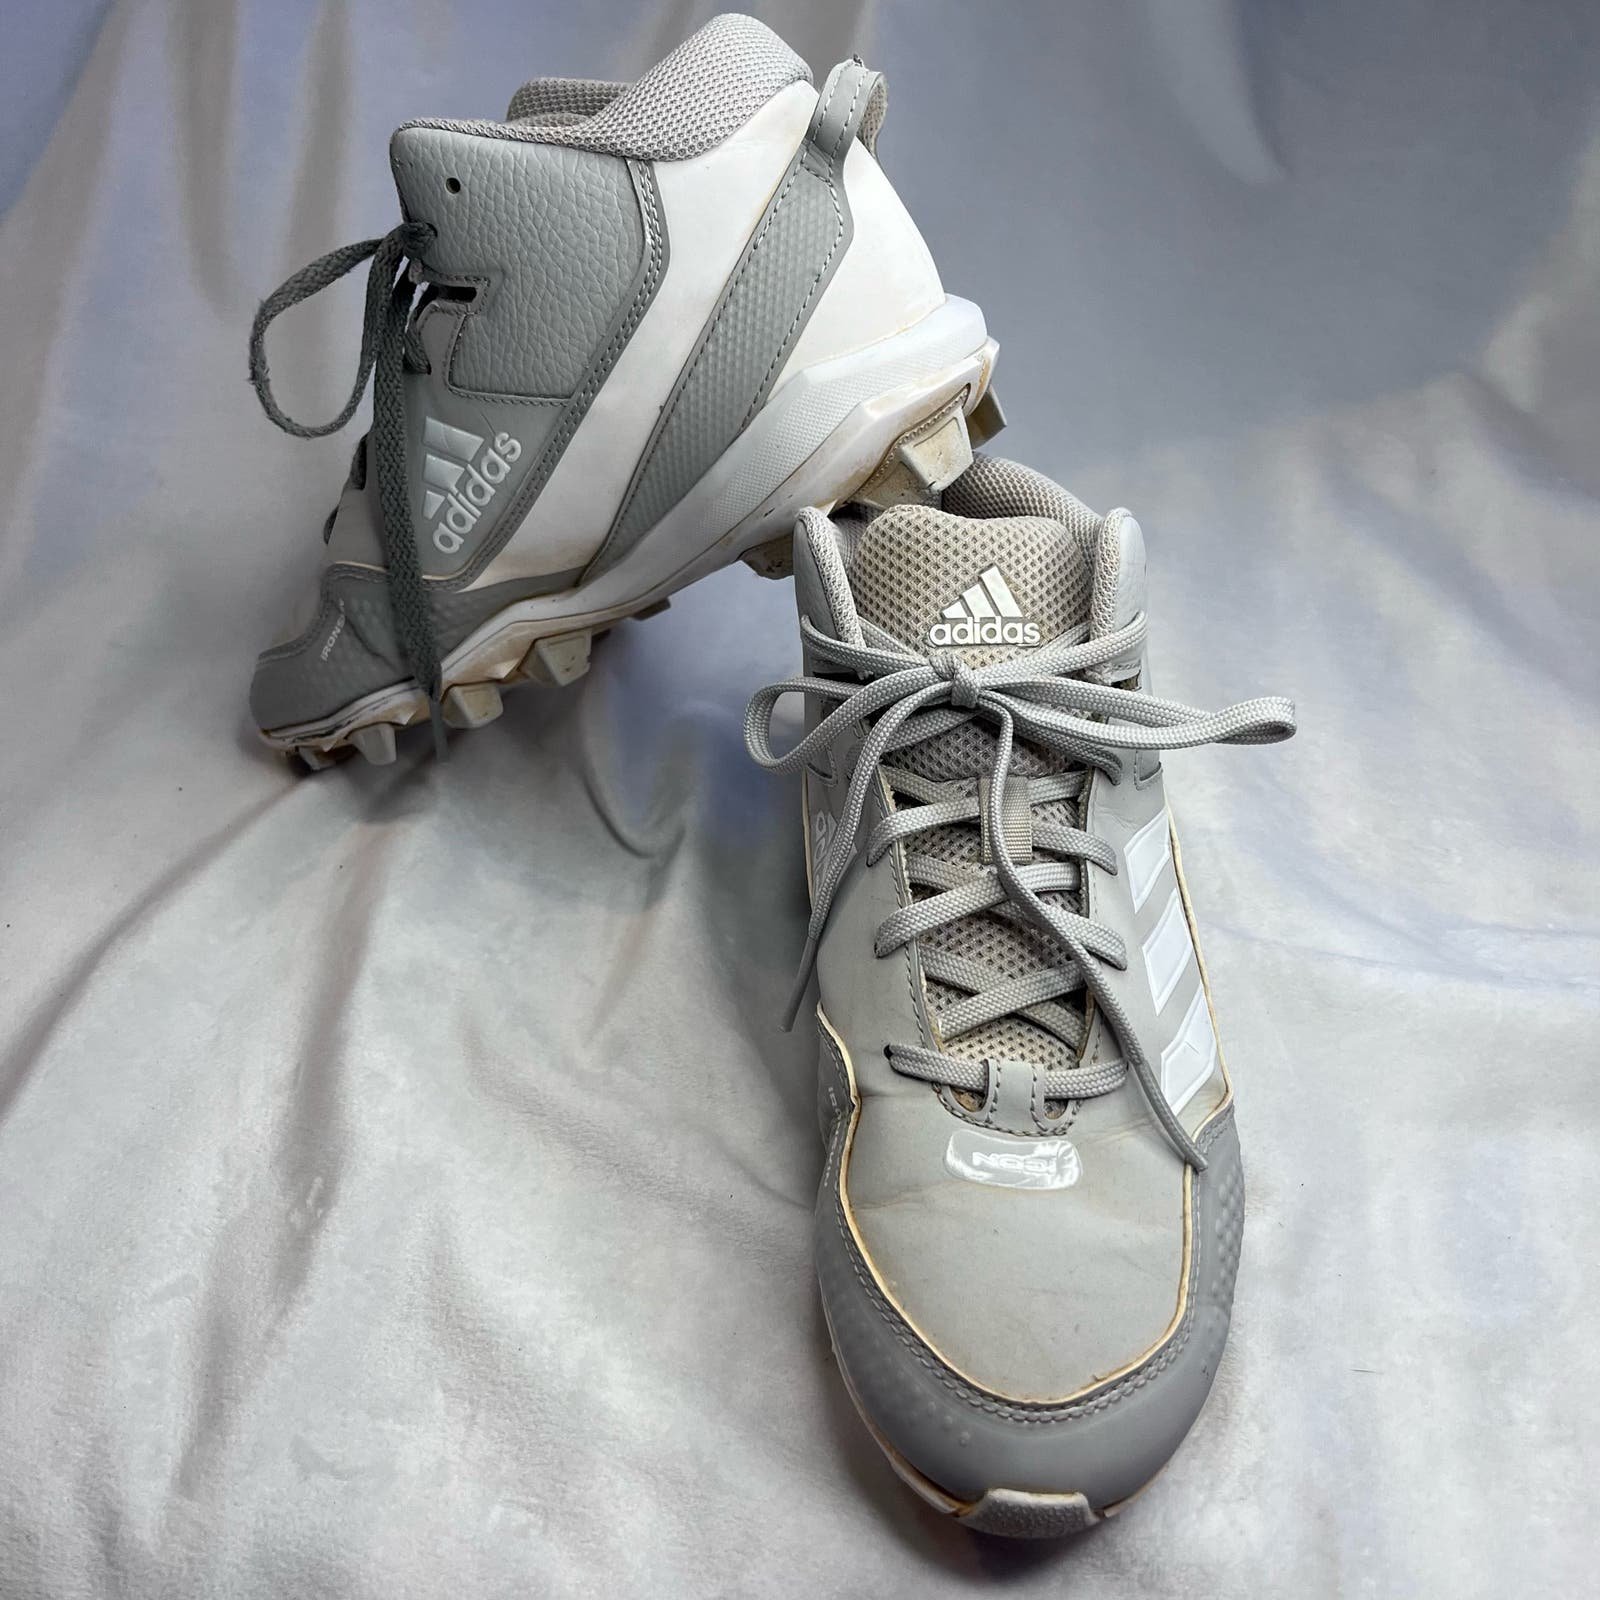 Adidas Icon 7 Mid Baseball Cleats Youth 5Y Gray White Trainers Sport Athletic jo3uAC75I